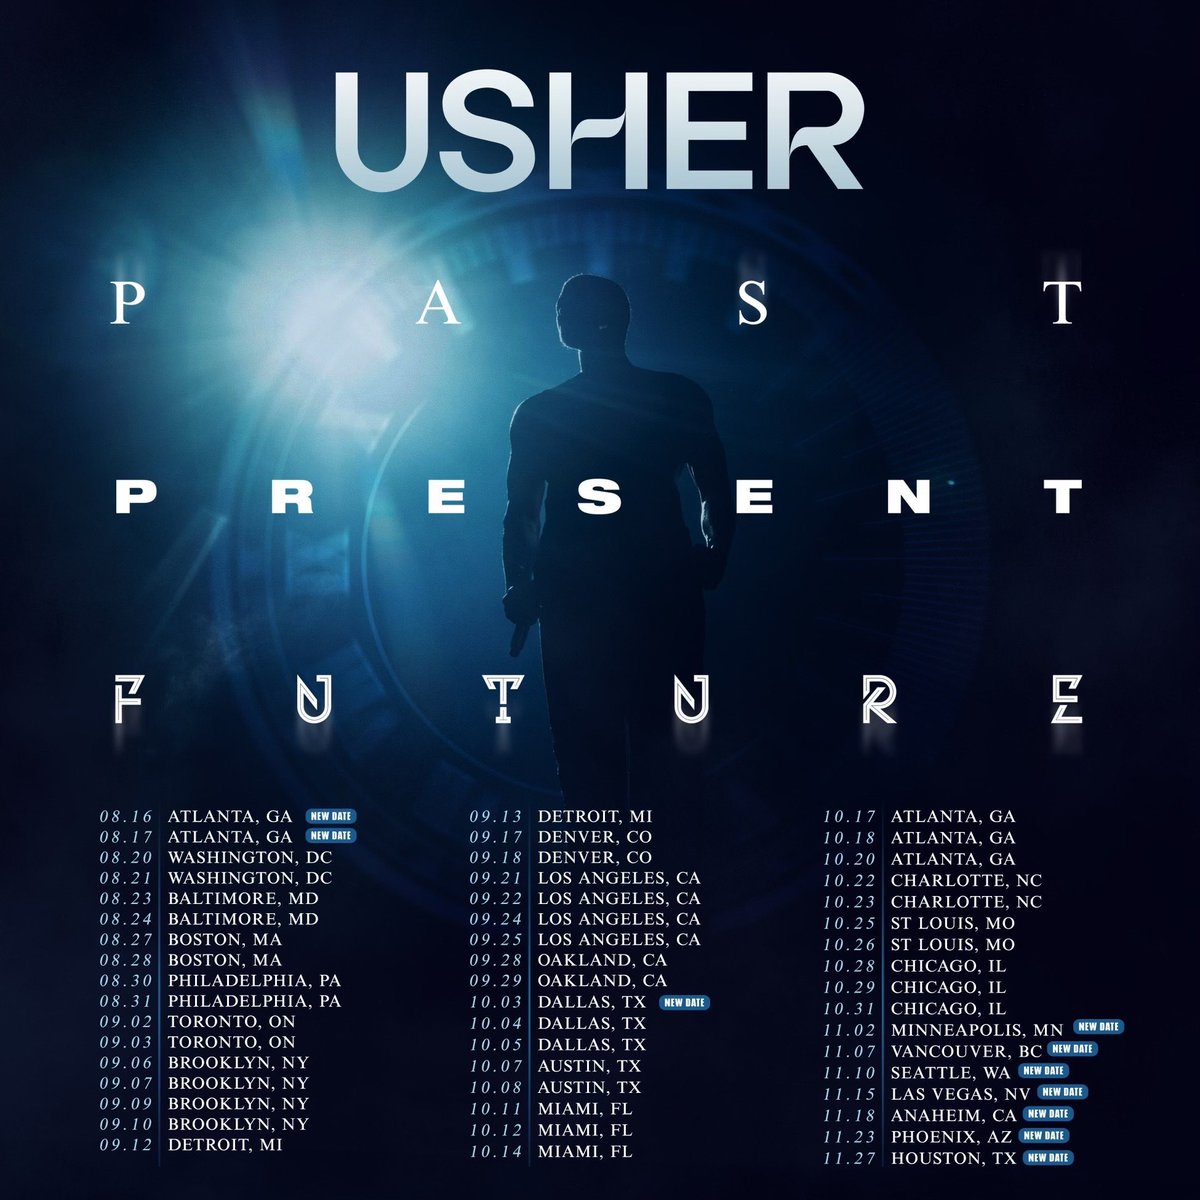 Fresh off the Super Bowl stage, @Usher is embarking on his PAST PRESENT FUTURE tour, starting August 2024! ⚡